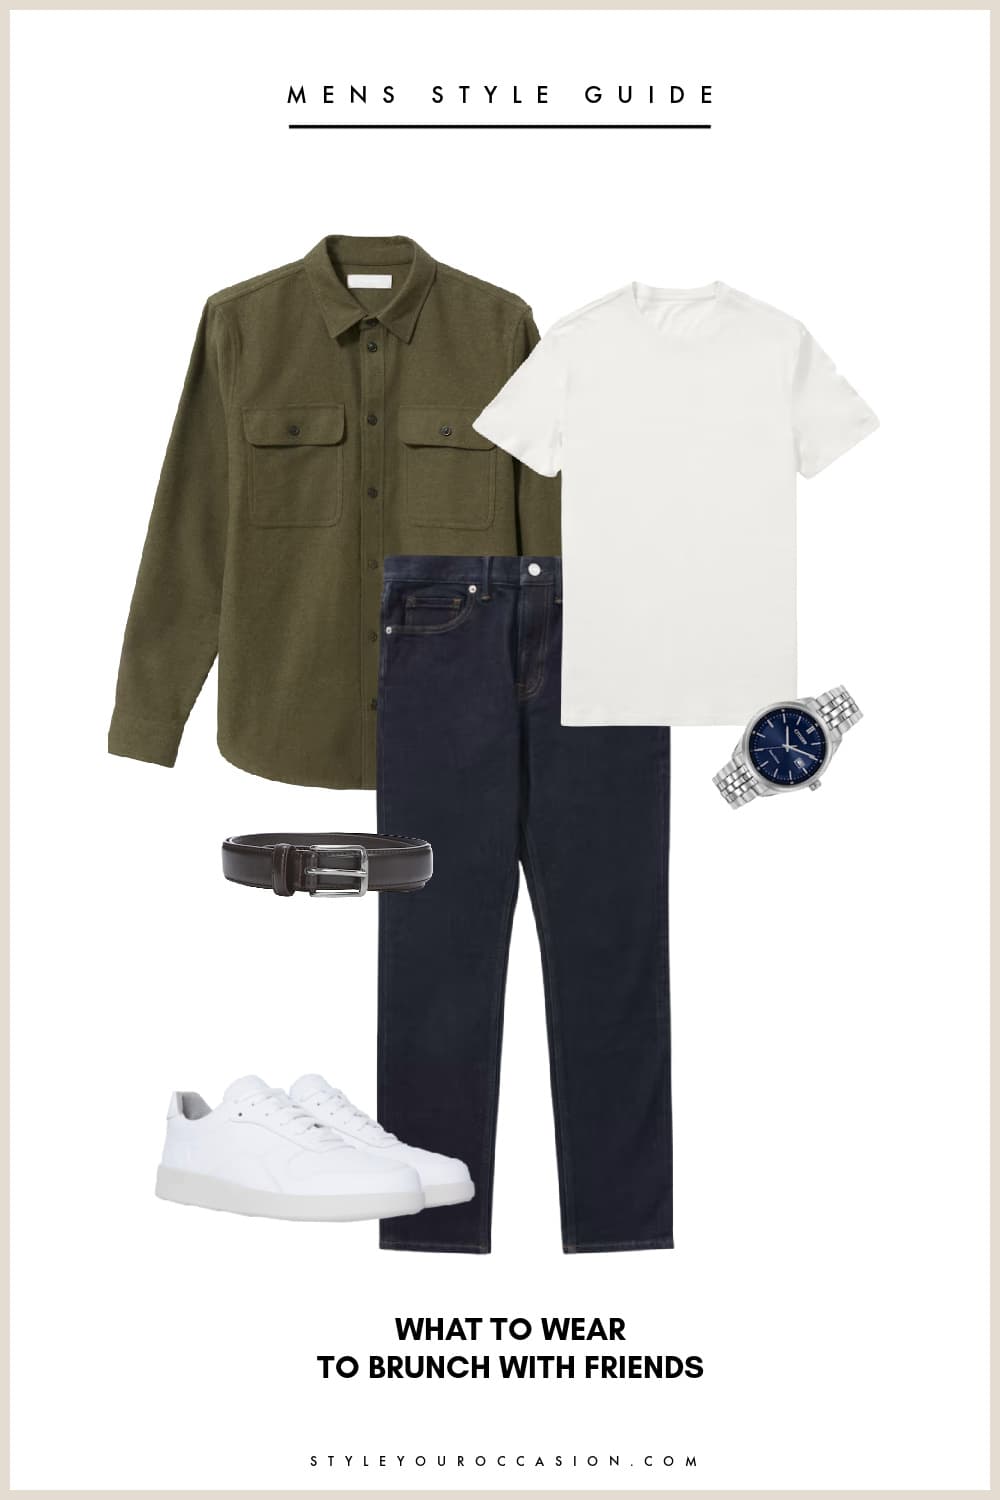 An image board of a mens brunch outfit with dark blue jeans, a white tee, a dark green shacket, white sneakers, a black belt, and a silver watch